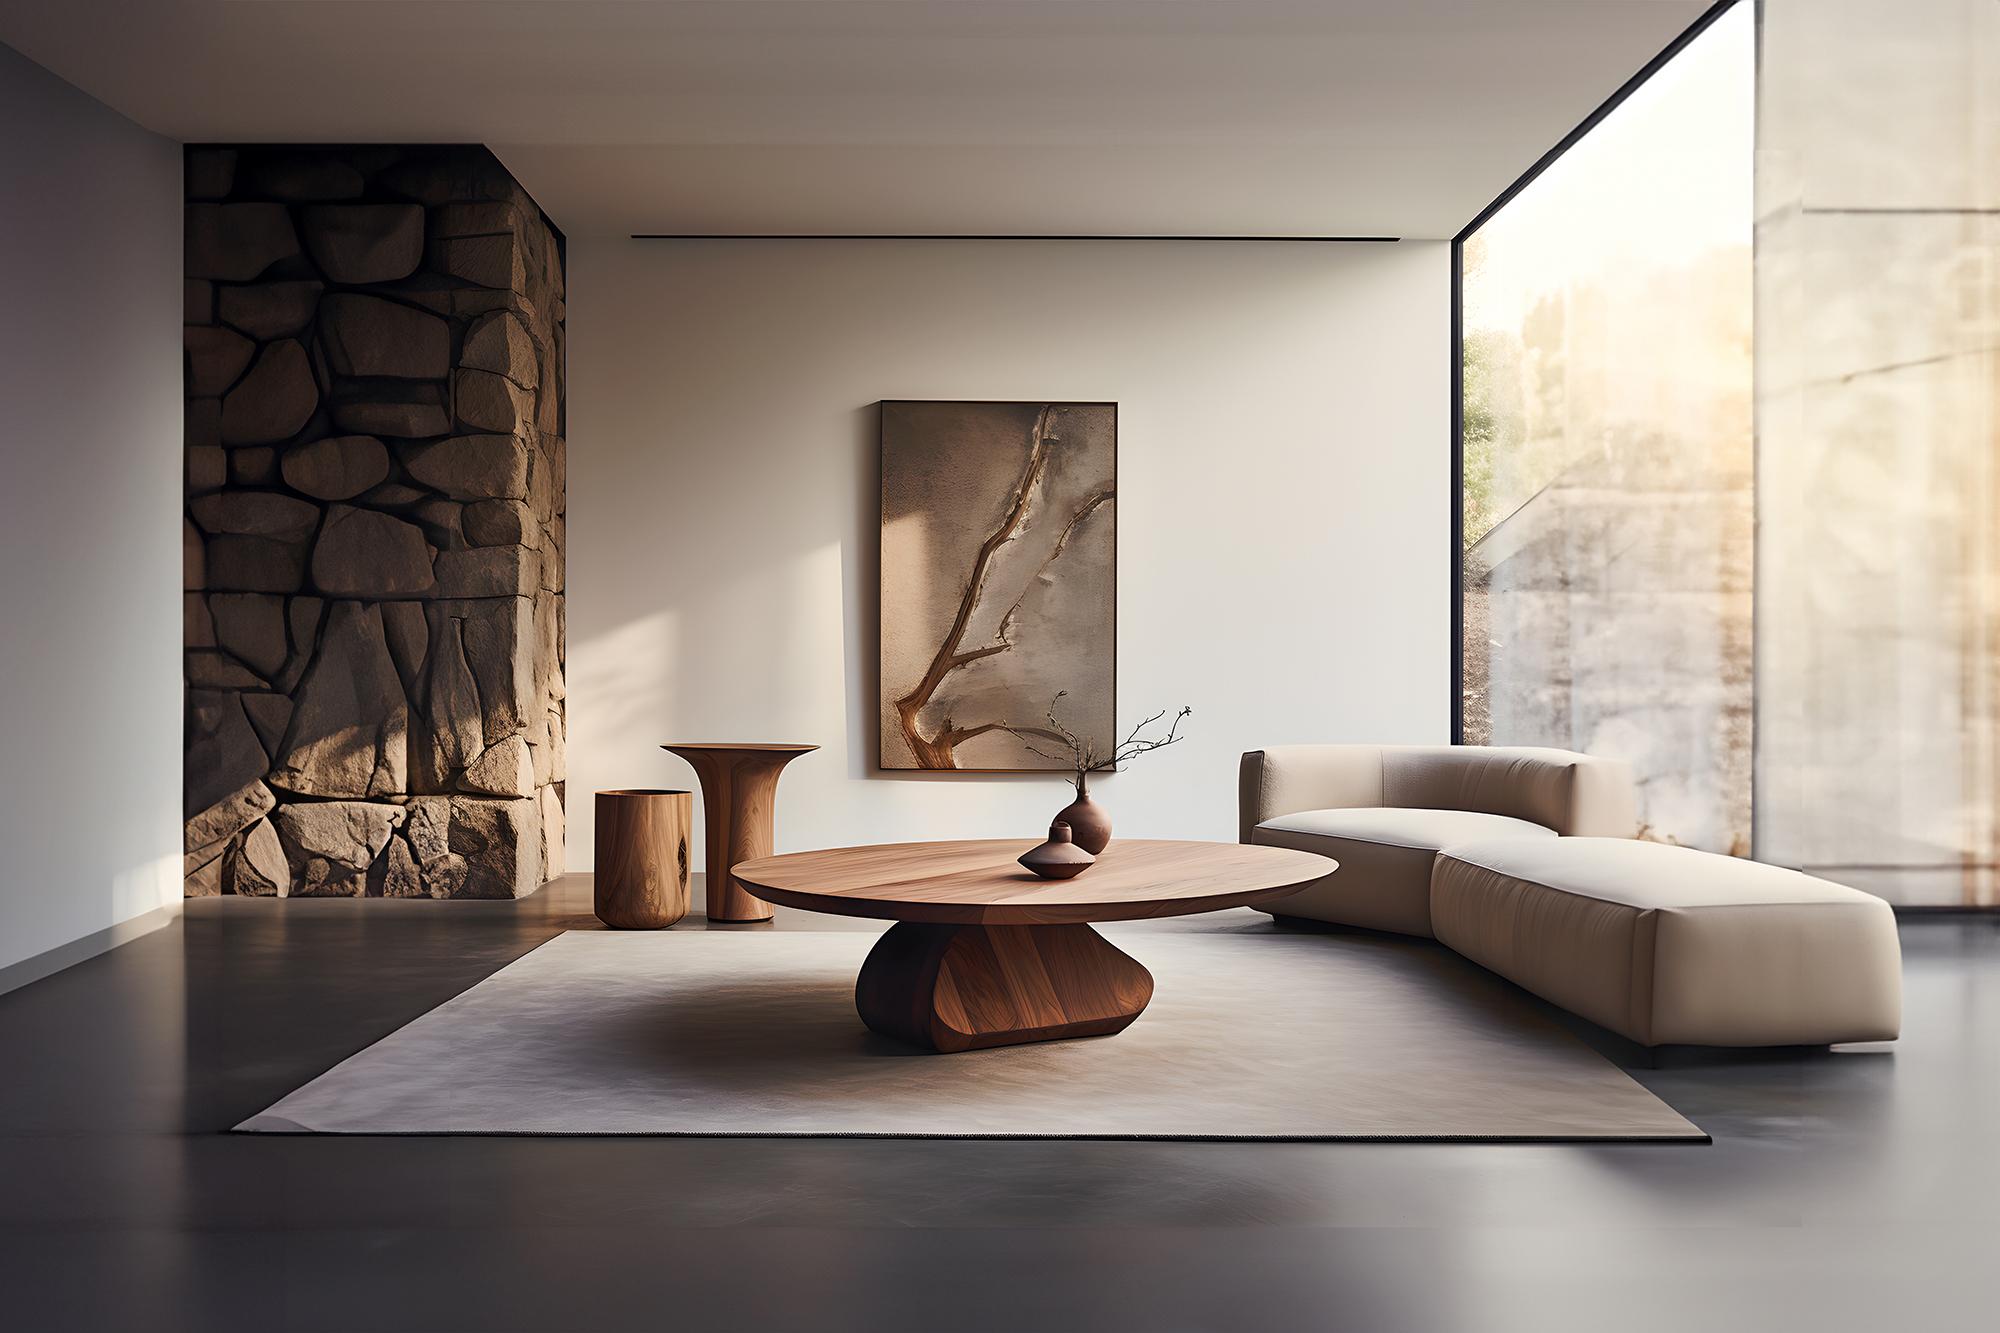 Sculptural Coffee Table Made of Solid Wood, Center Table Solace S46 by Joel Escalona


The Solace table series, designed by Joel Escalona, is a furniture collection that exudes balance and presence, thanks to its sensuous, dense, and irregular